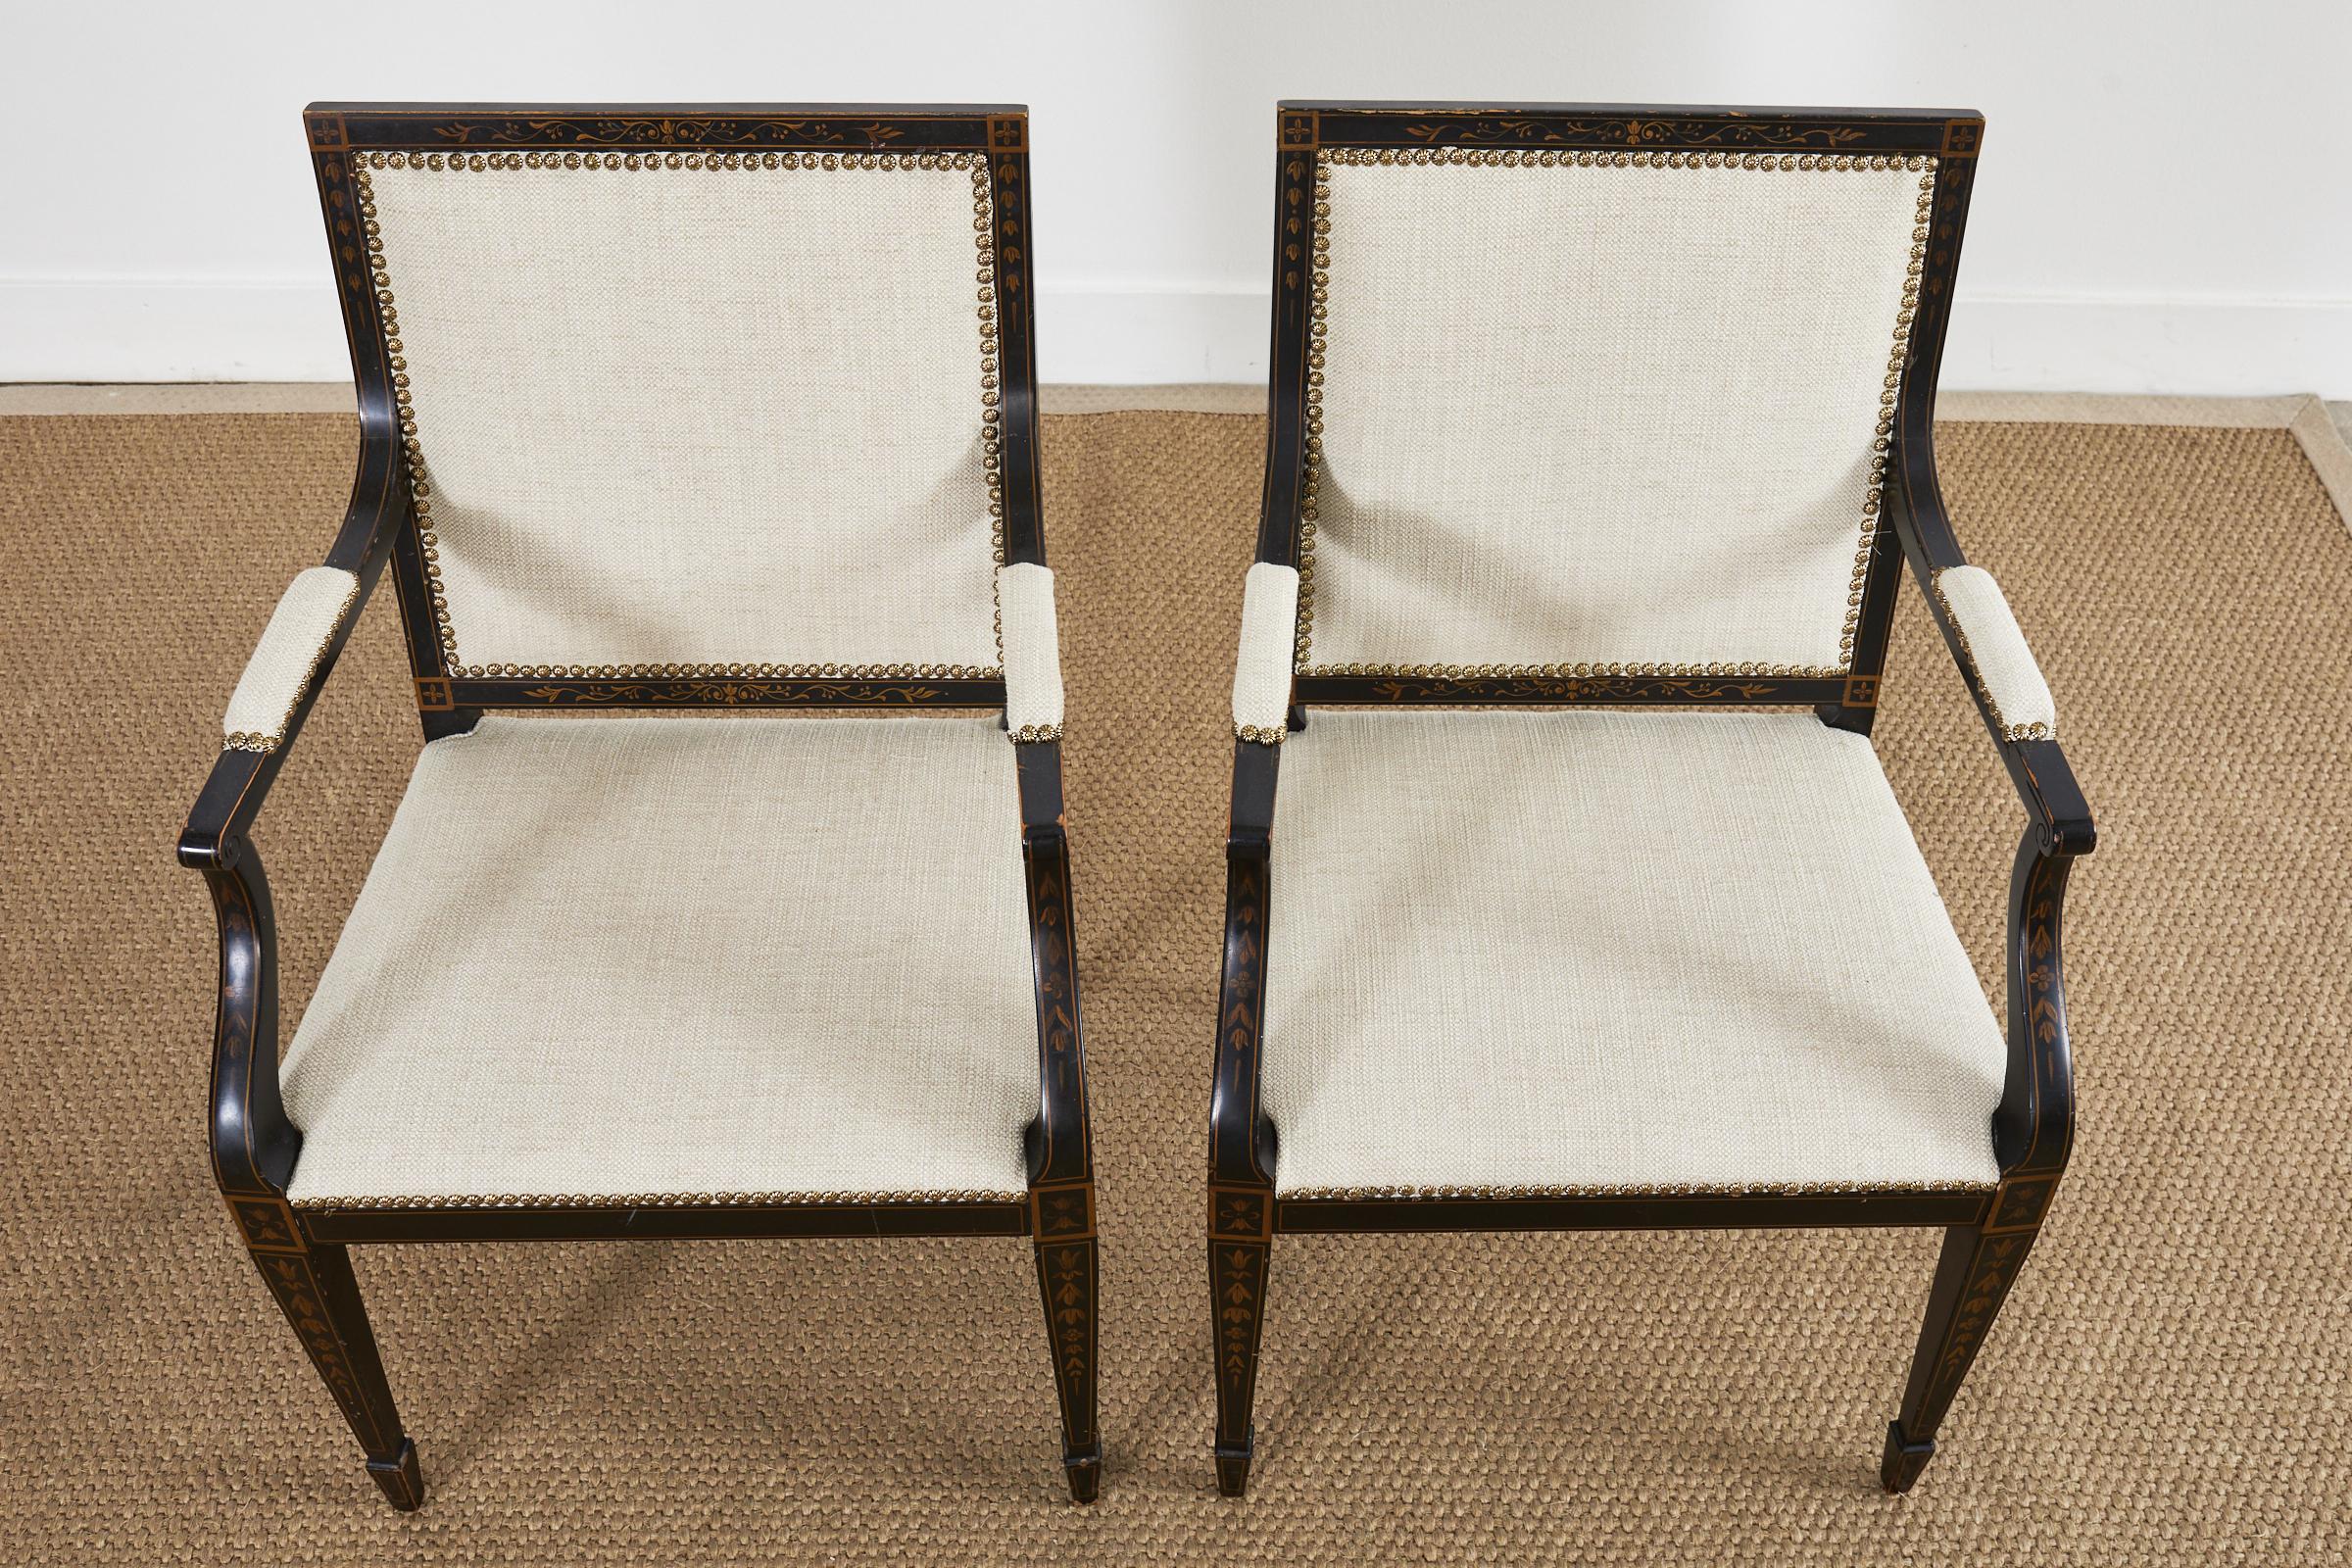 Lacquered Pair of Neoclassical Regency Style Ebonized Mahogany Library Chairs